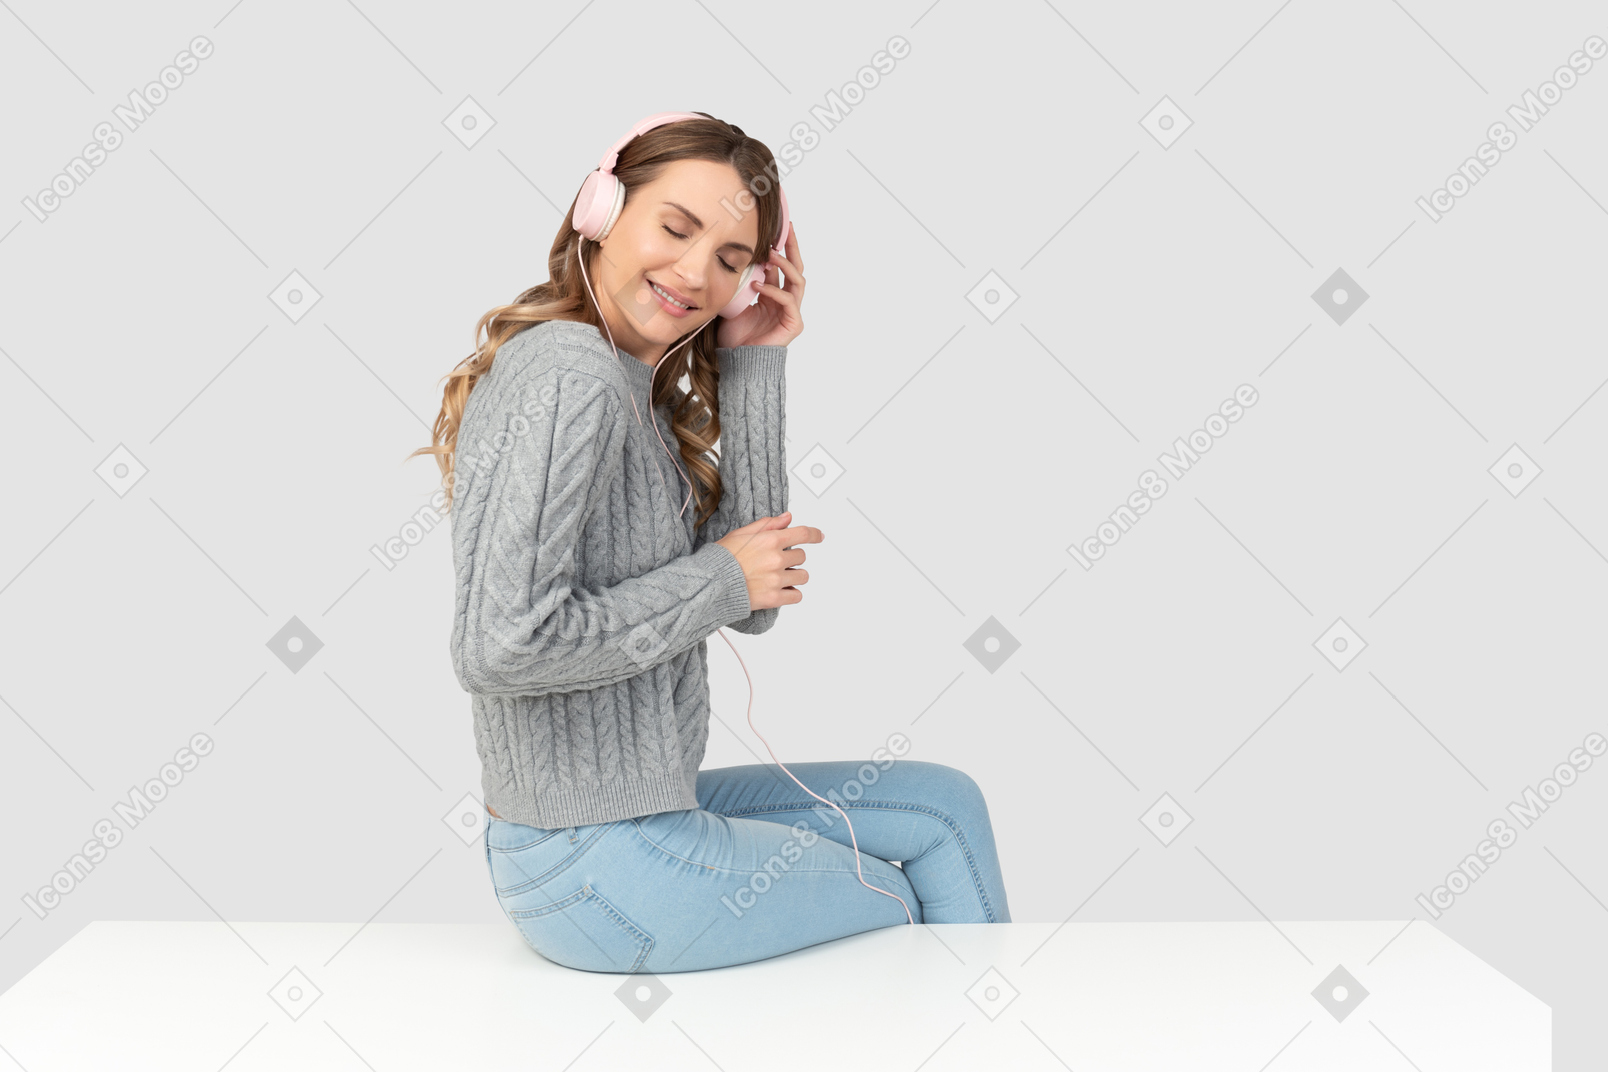 A woman standing on a couch